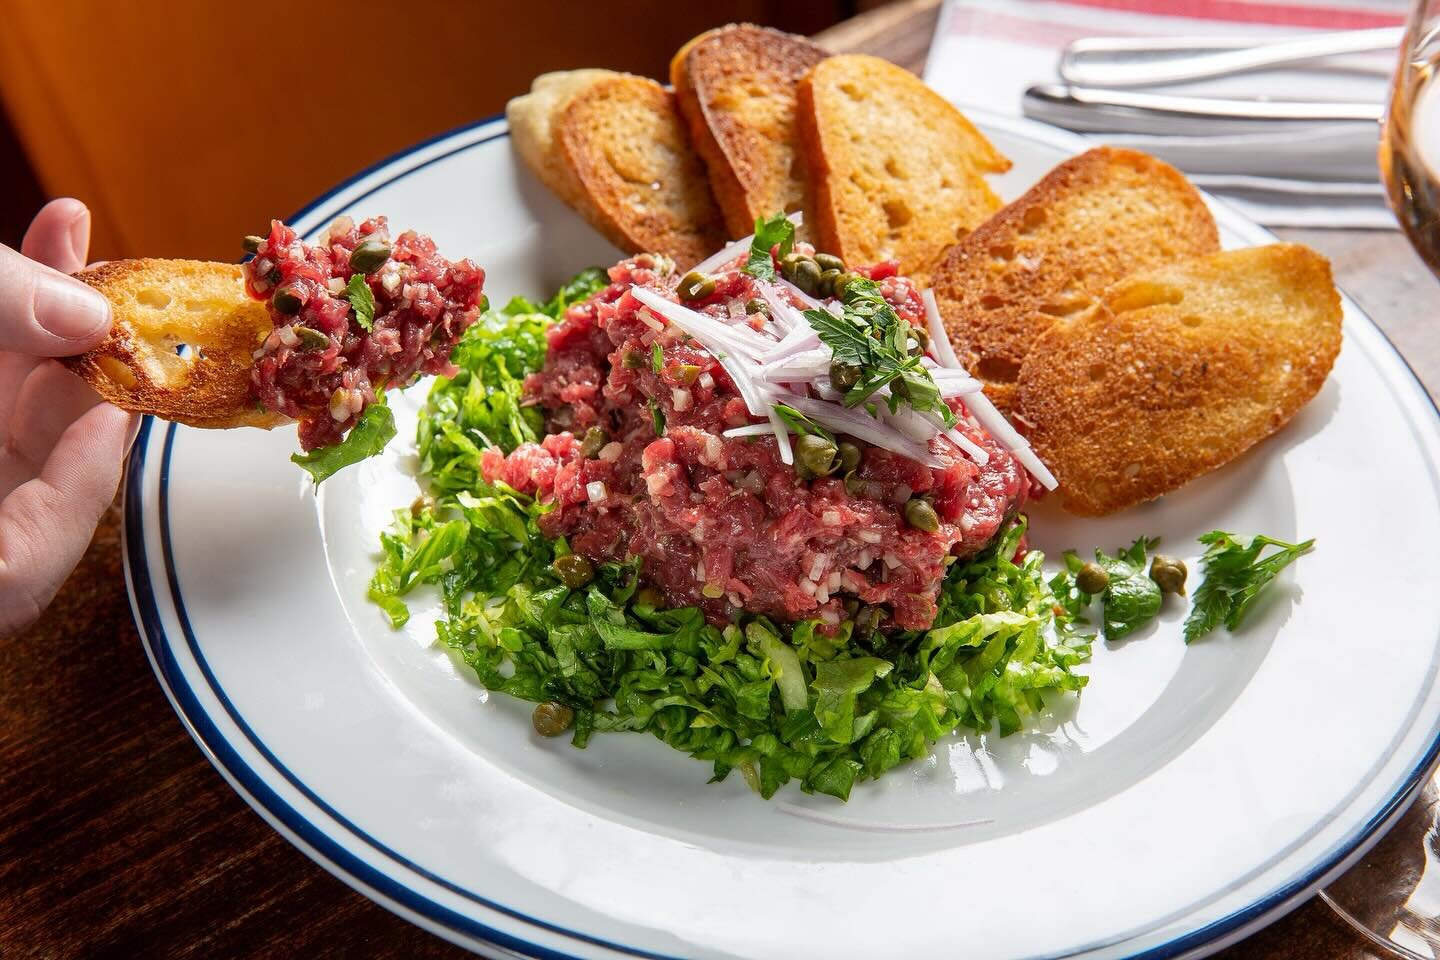 Here&rsquo;s your reminder- every Thursday Bouchon has Steak Tartare and Sweetbreads on the menu! 
#frenchfood #frenchcomfortfood #ashevillerestaurant #avlbouchon #eatlocal #steaktartare #sweetbreads